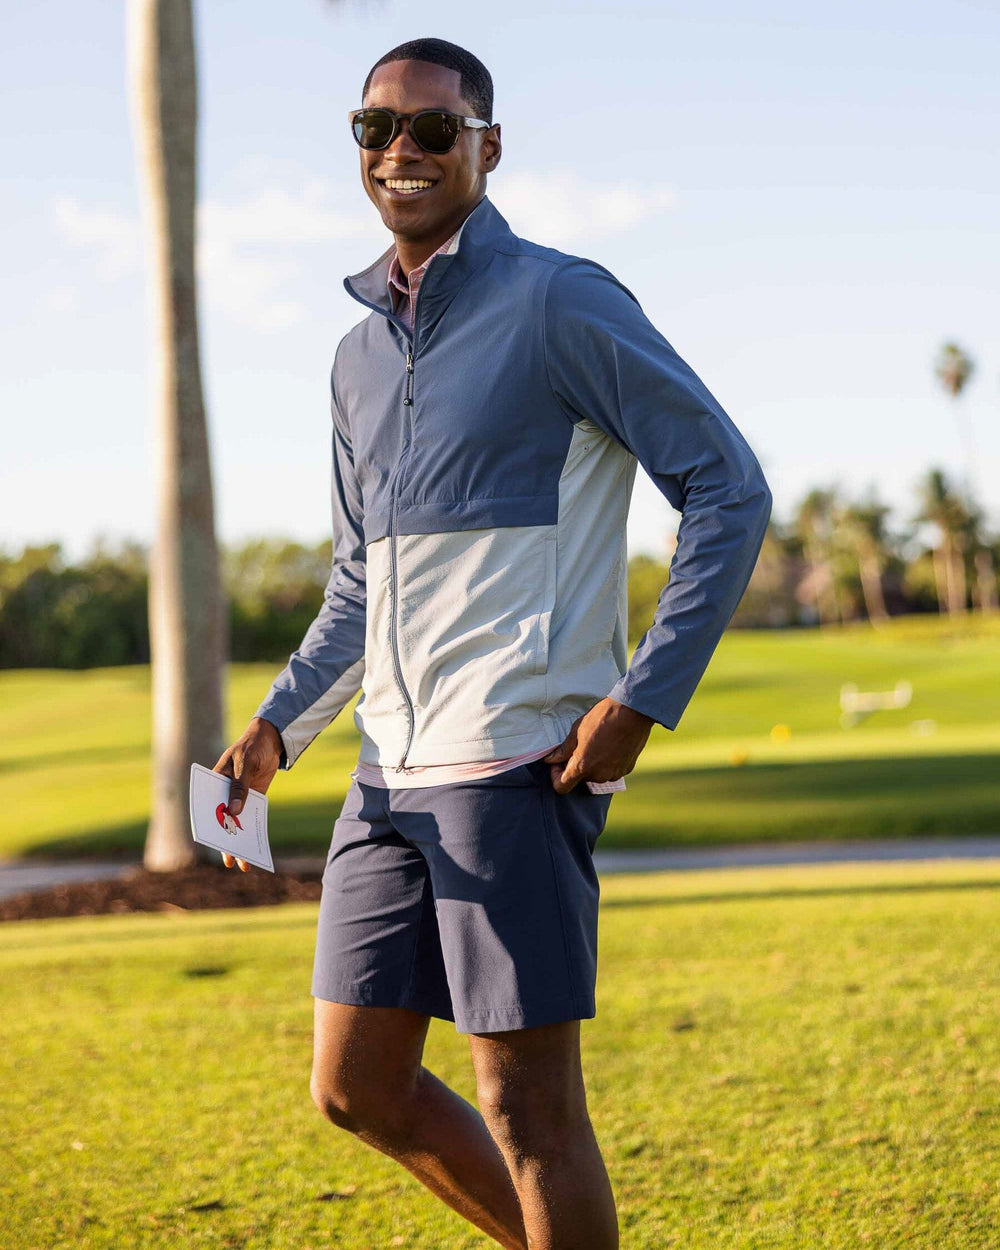 The model lifestyle view of the Men's Gulf 8 Inch Brrr Performance Short by Southern Tide - True Navy